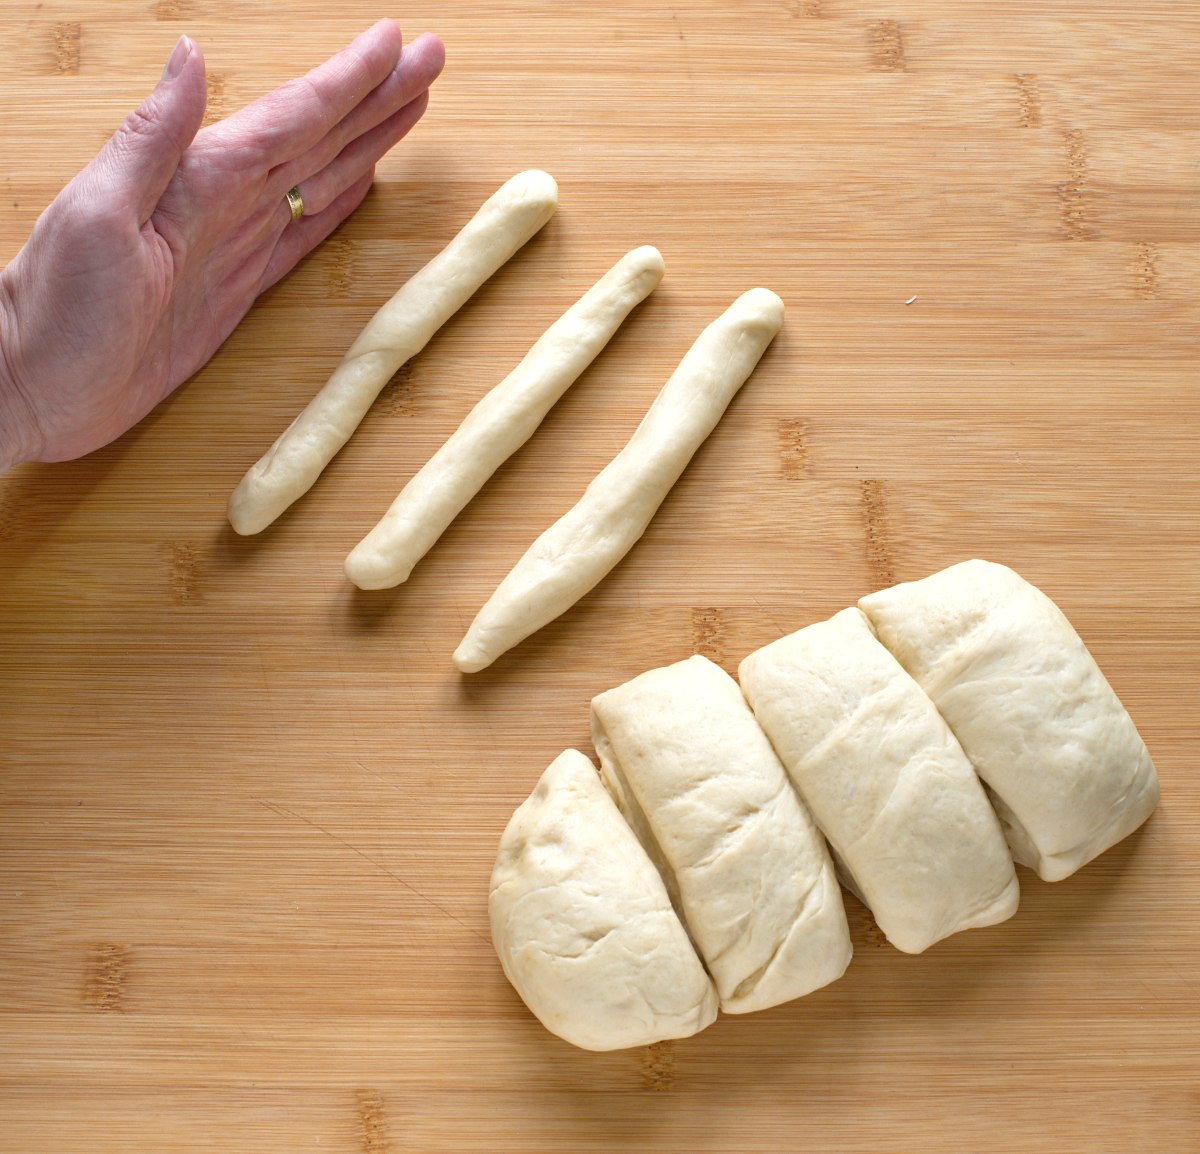 Three strands of yest dough on a wooden working surface, left a palm. 